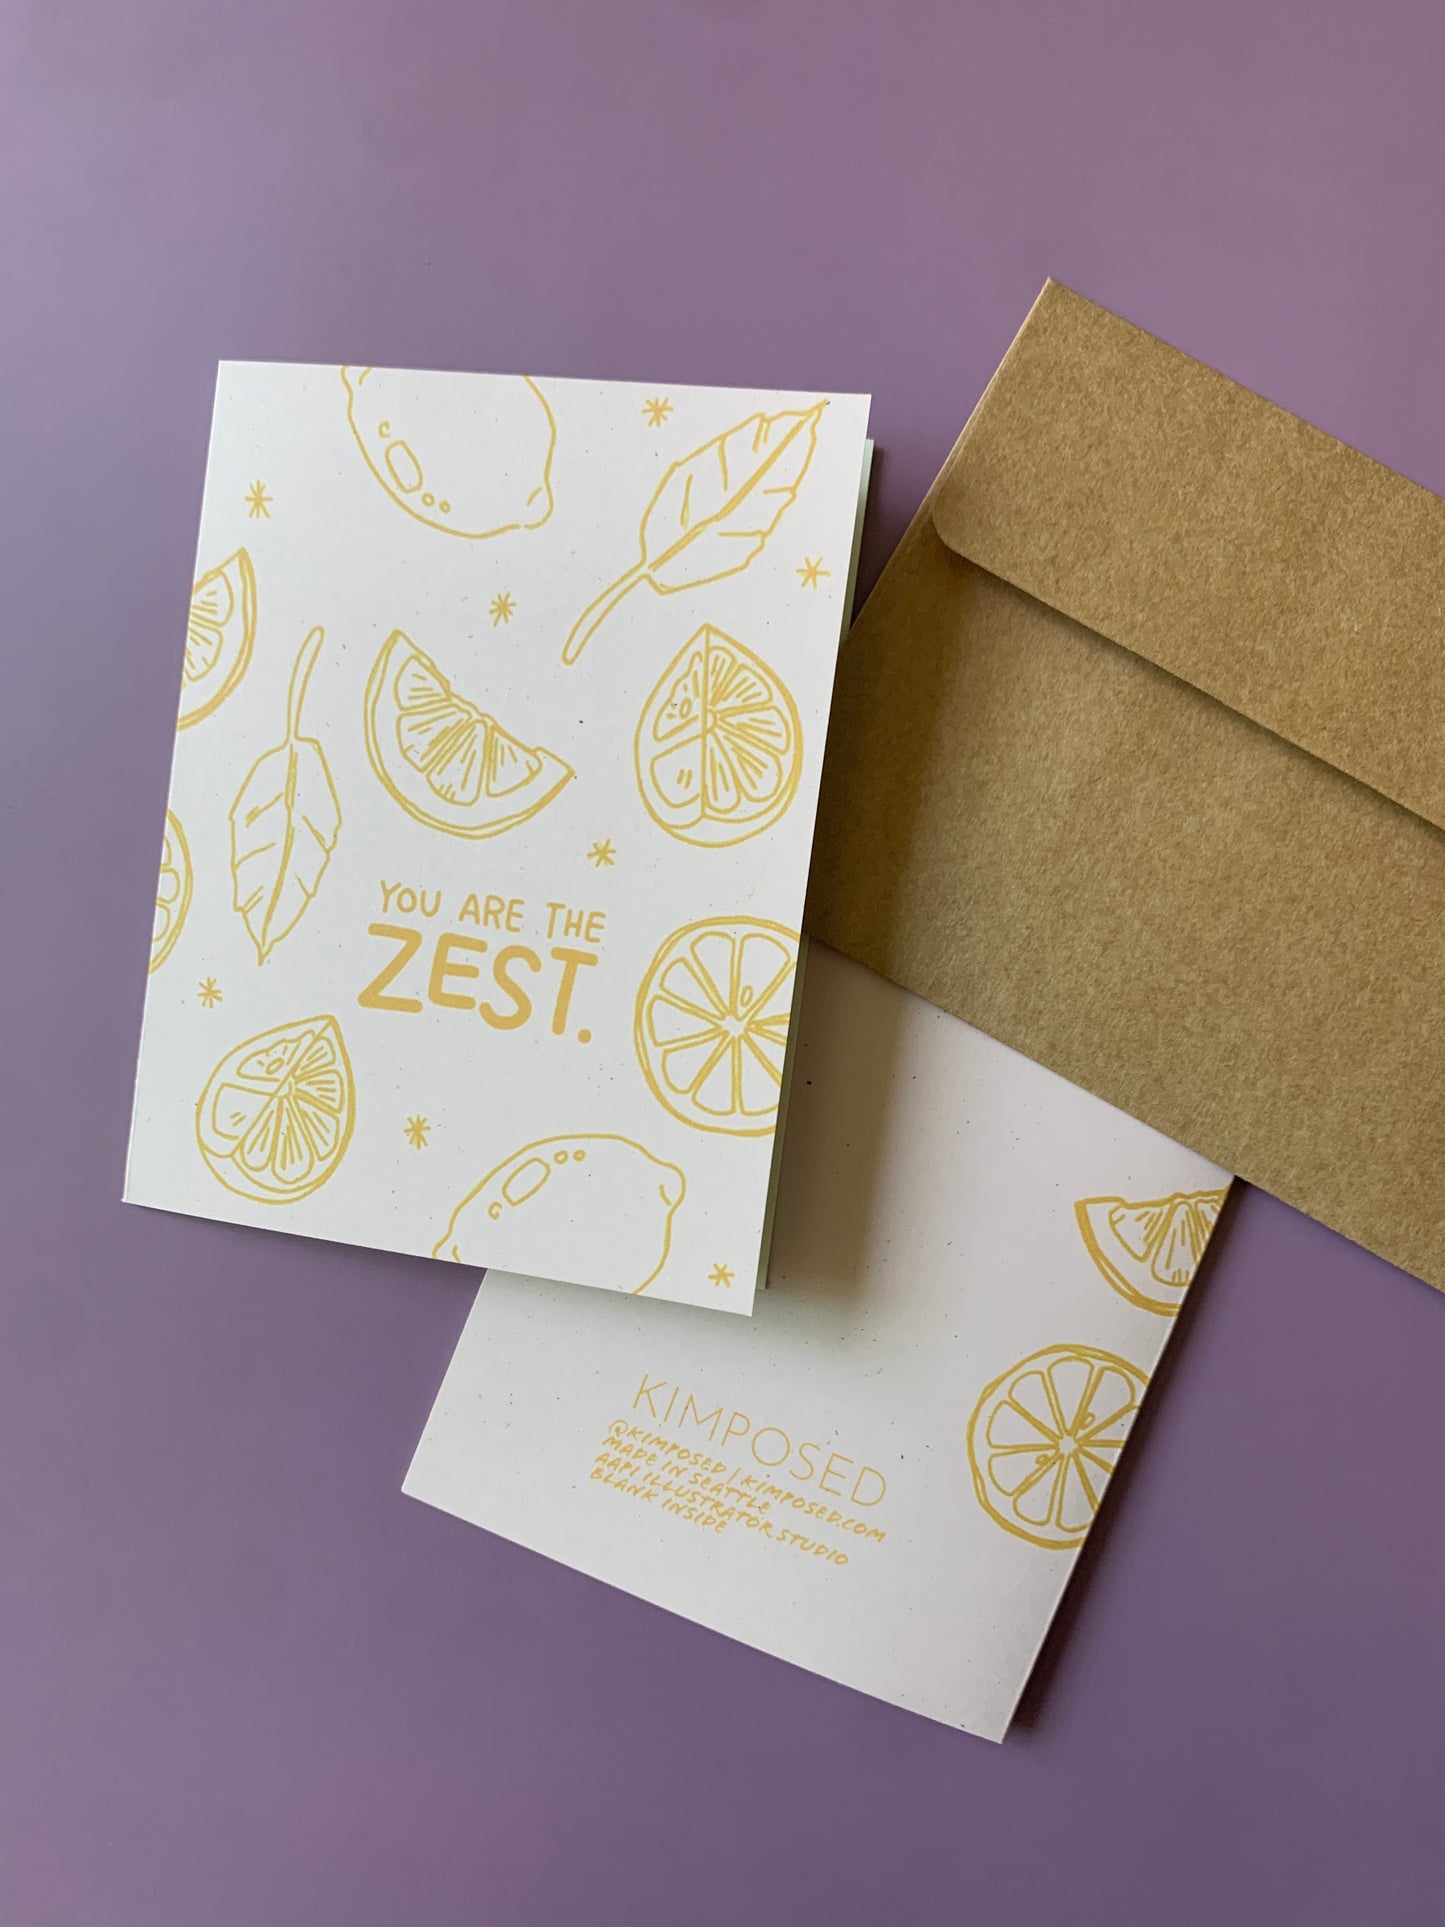 "You are the ZEST!" Lemon Sketch Greeting Card